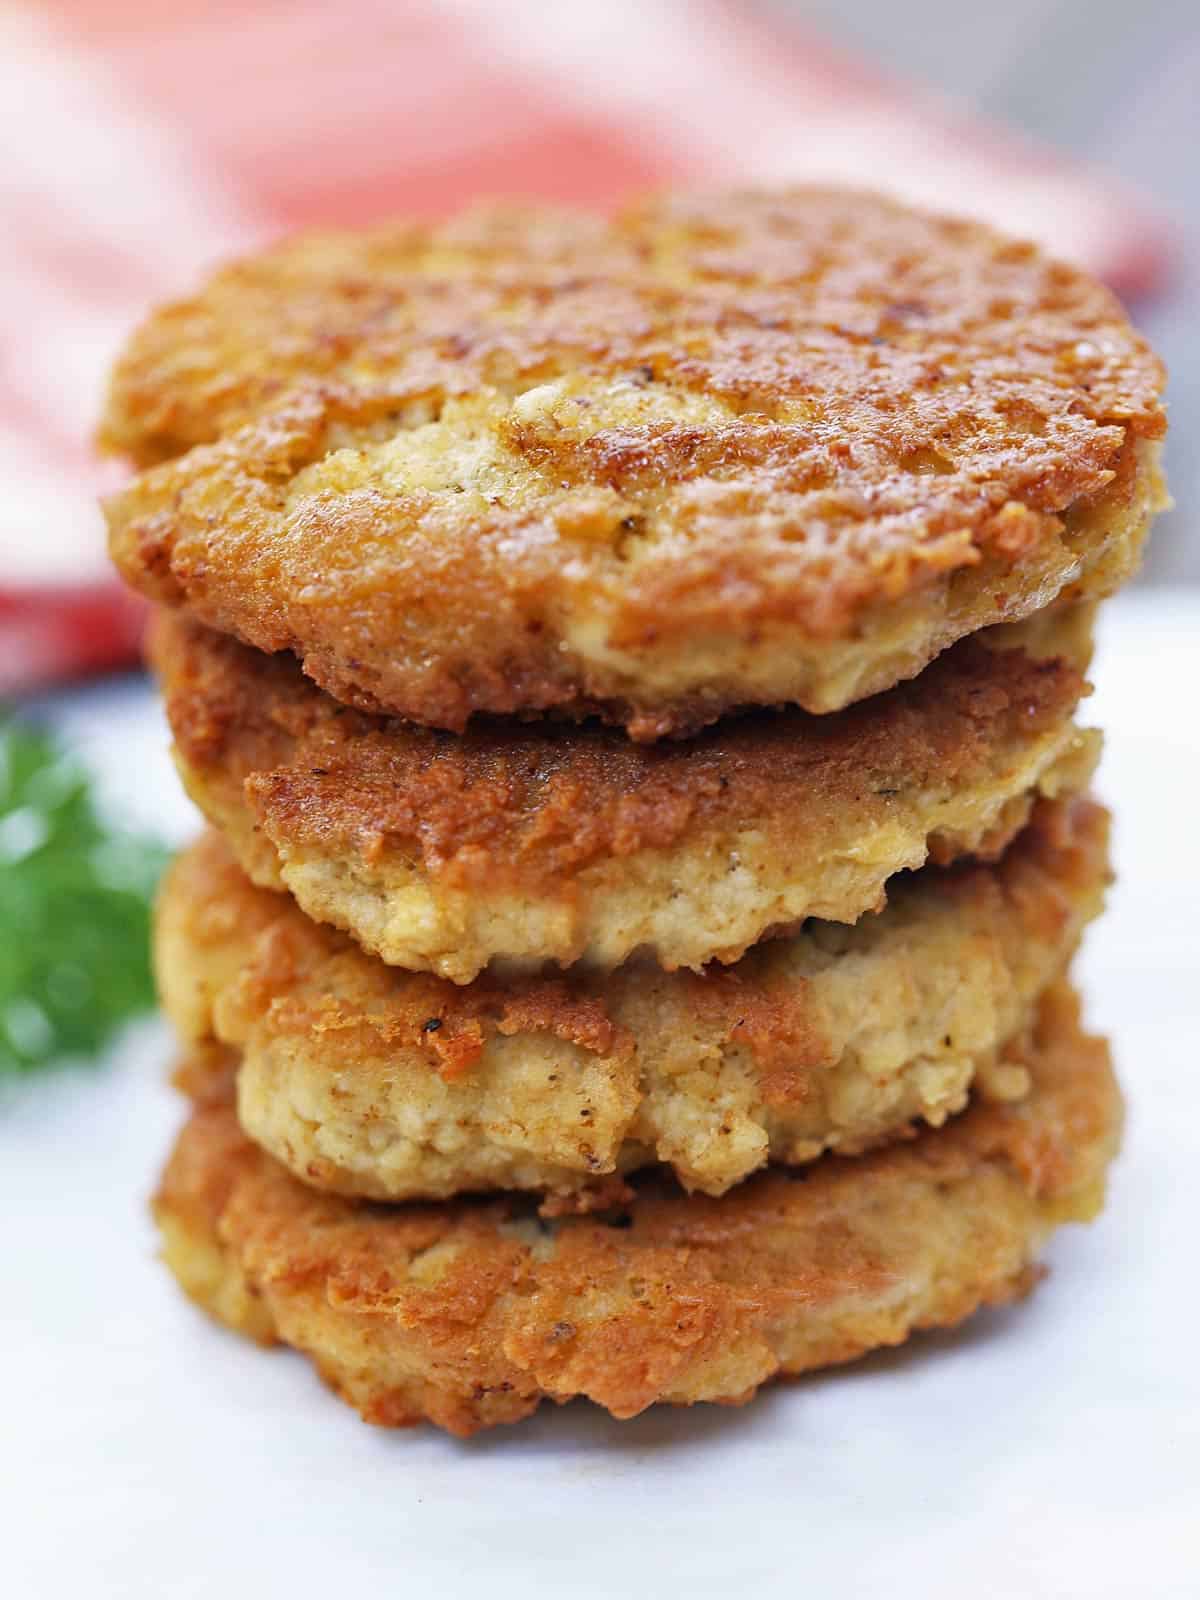 Four chicken patties are stacked on a plate.